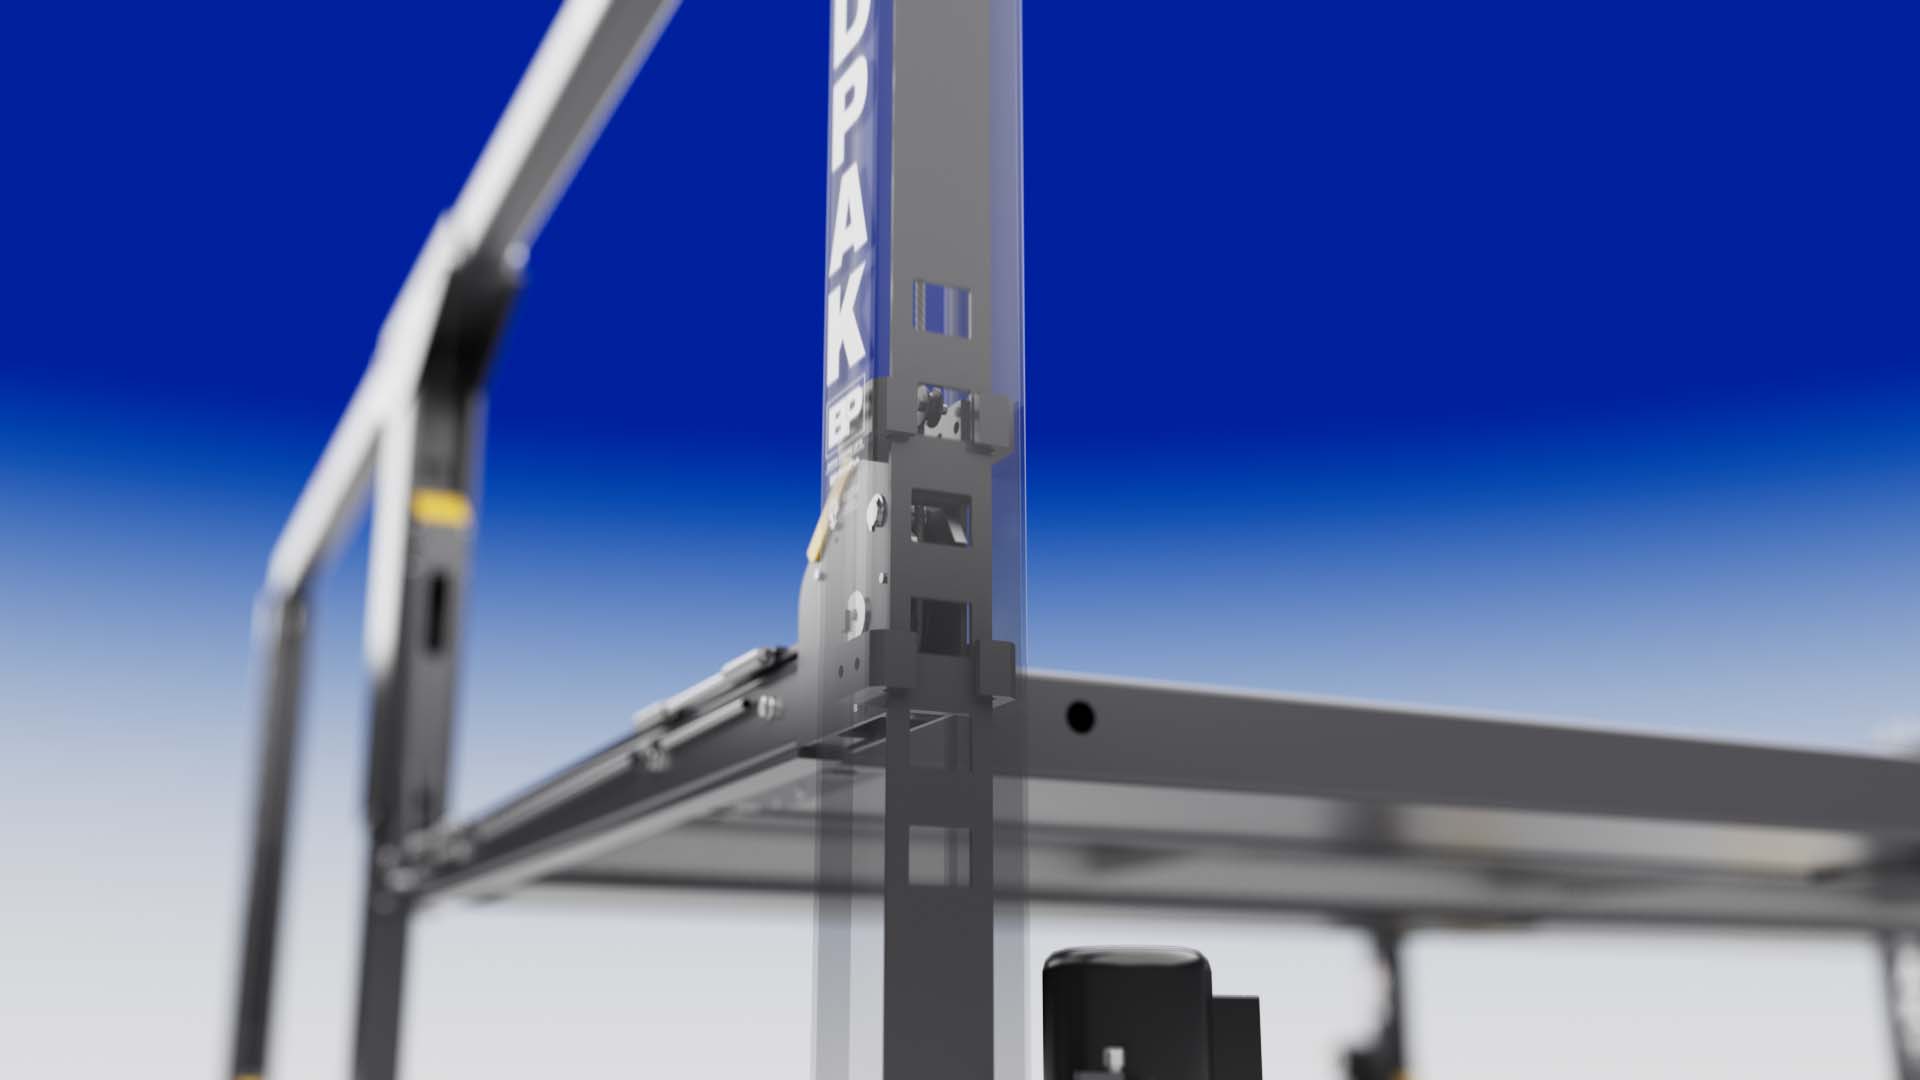 3D animation and renders of car lifts